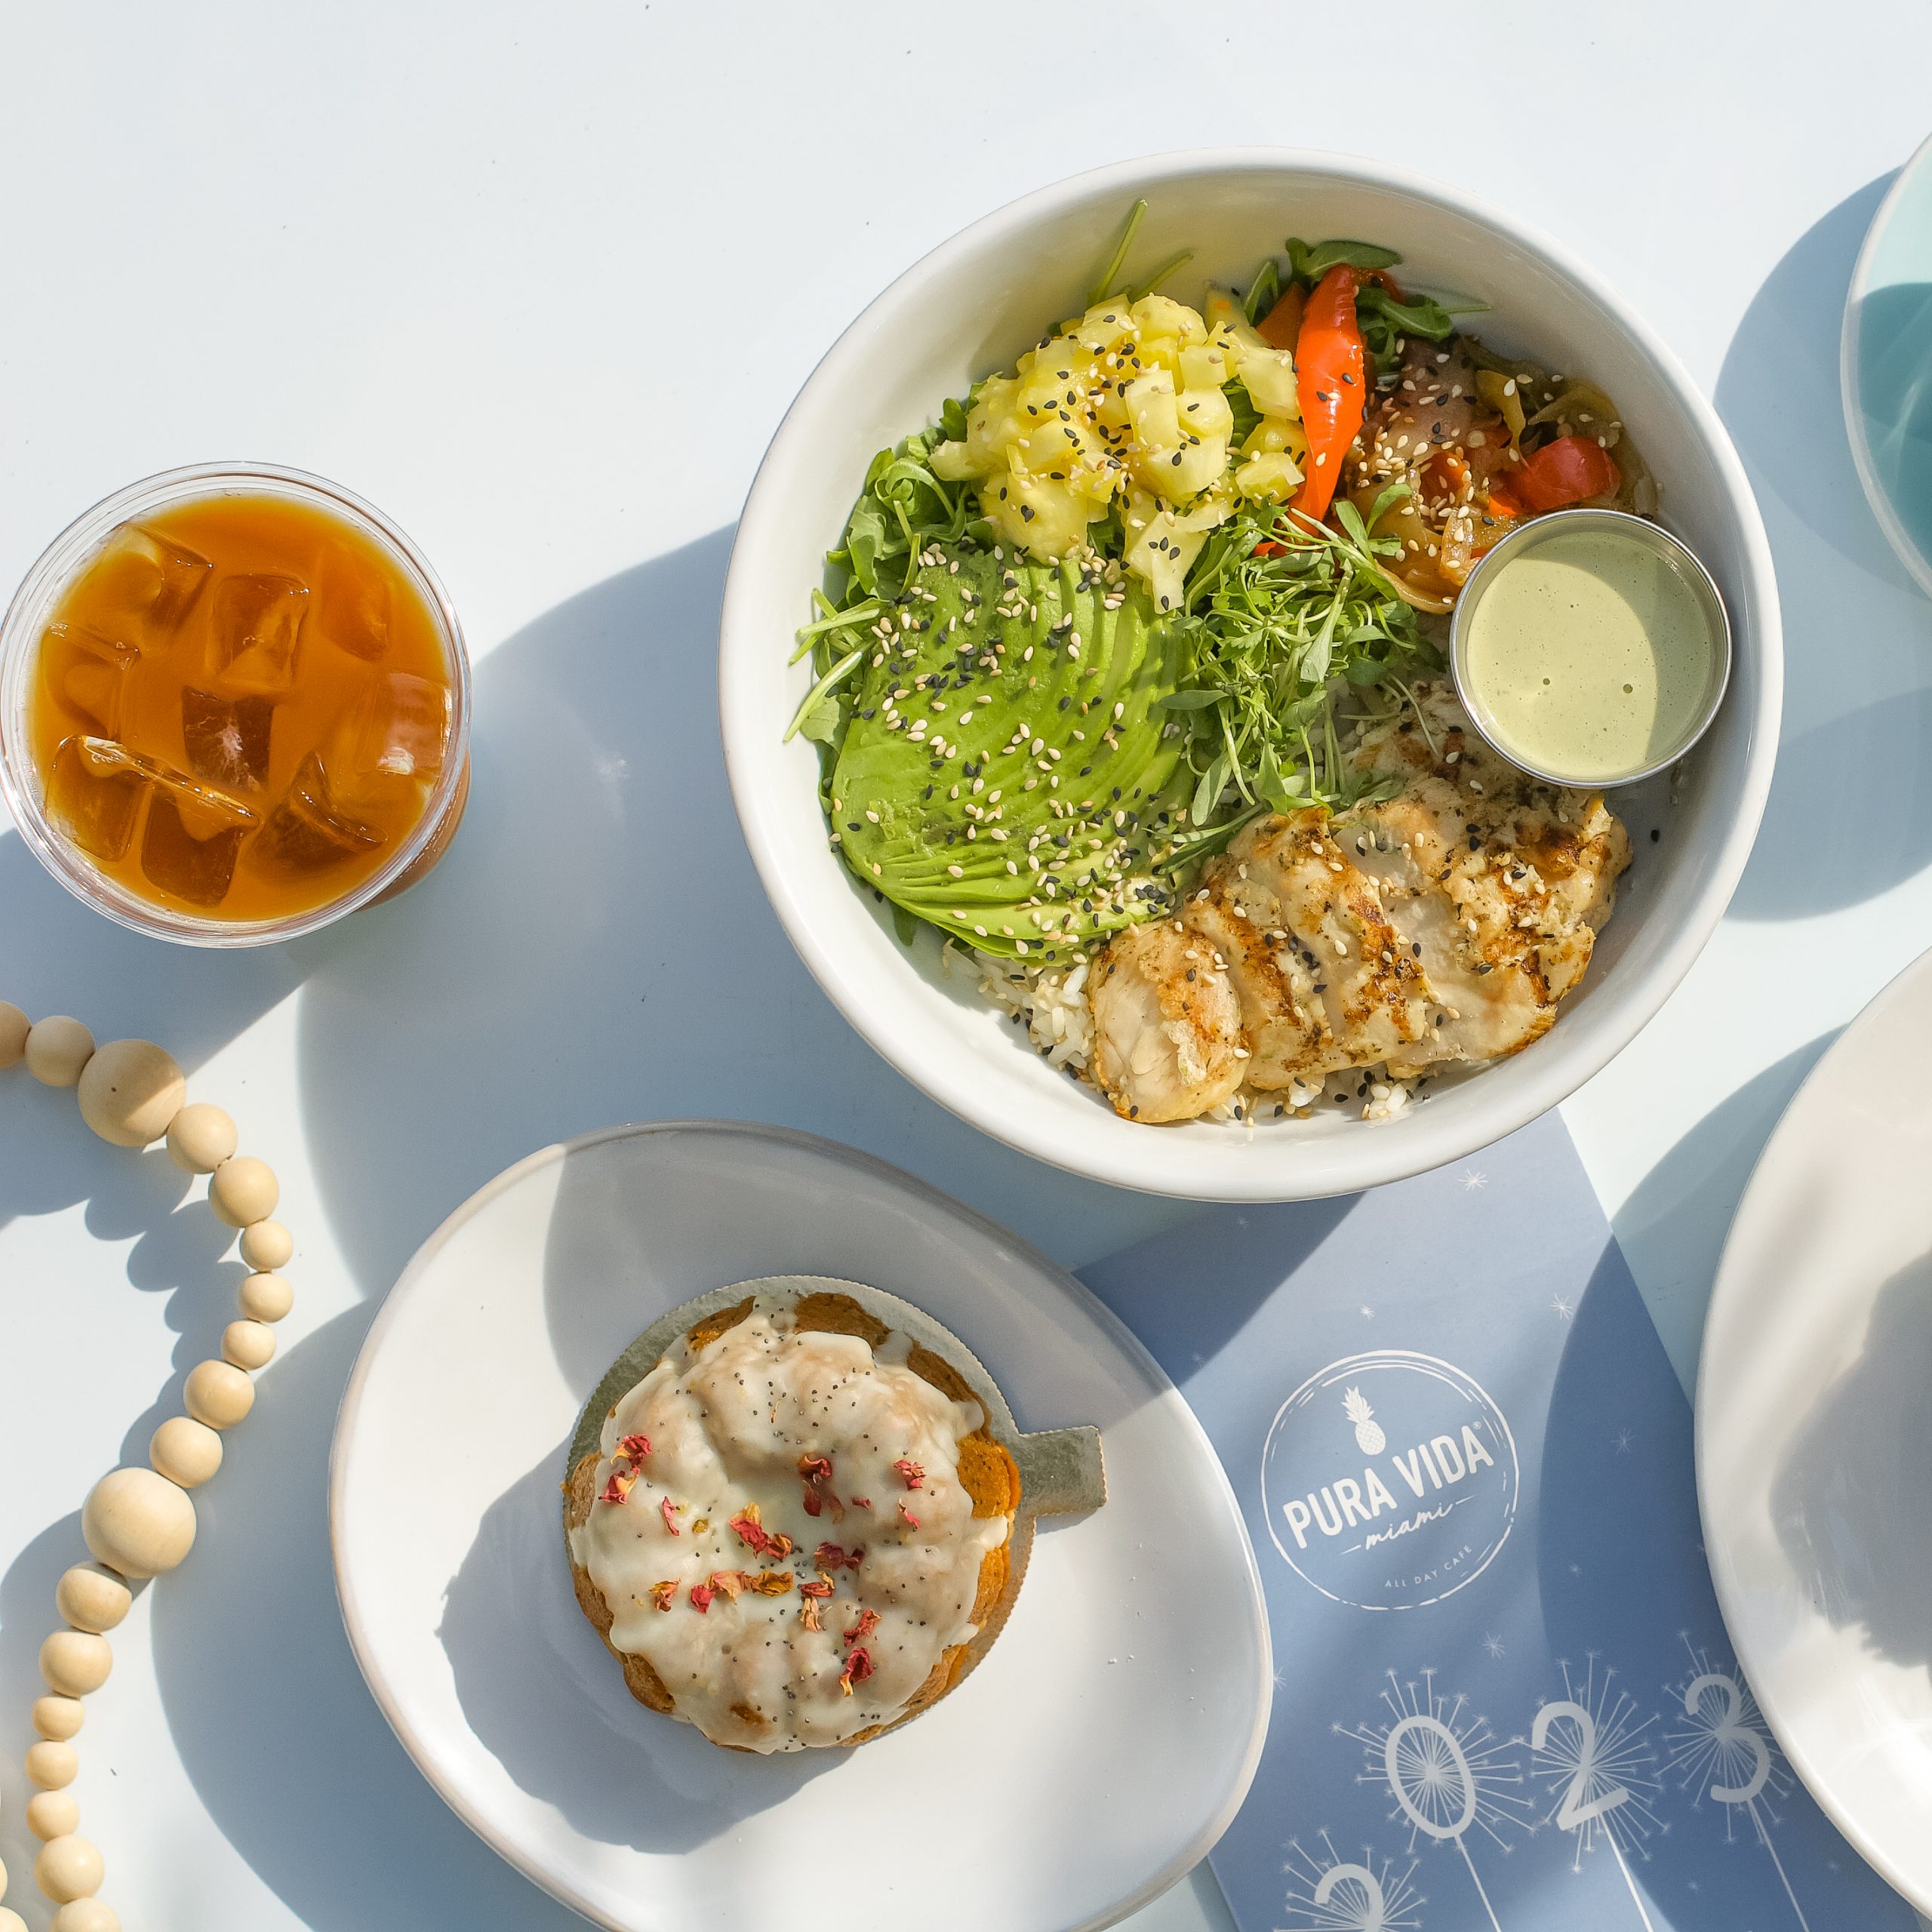 Pura Vida During Taste of Doral, Pura Vida Miami will be offering a special menu offer for dine-in customers at $30: Any wrap or bowl Any sweet treat Any coffee No add-ons, only removals This offer is available for lunch on Monday-Sunday from 11:00 am-2 pm only